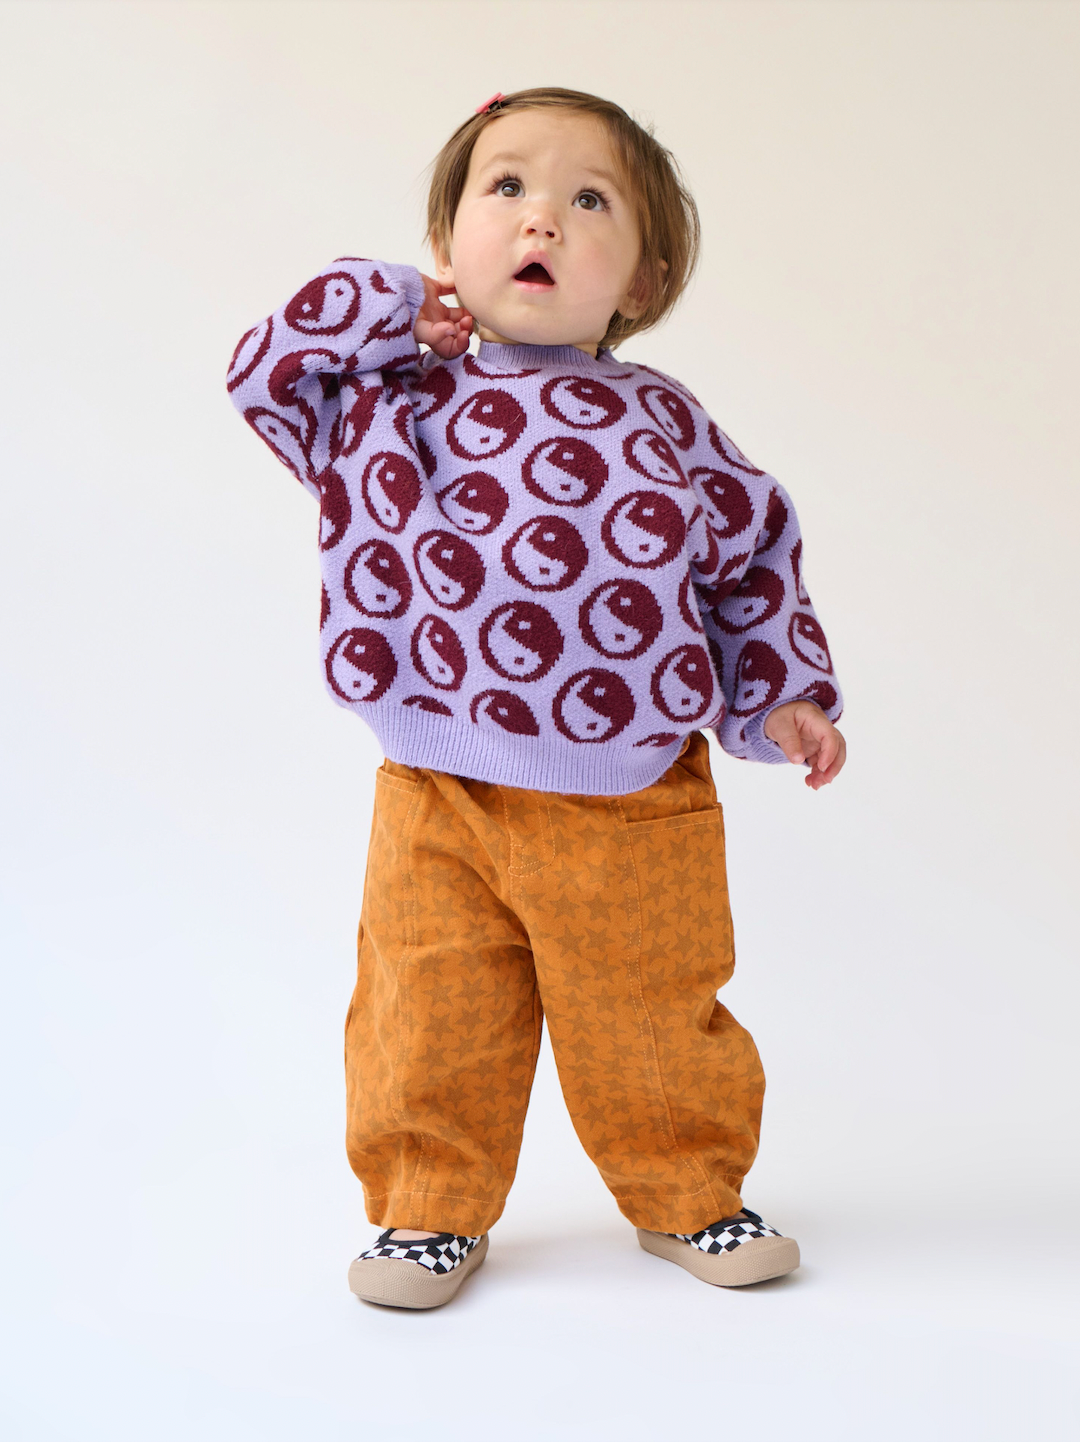 Violet | A toddler wearing a kid's sweater patterned with dark red yin and yang circles on a violet background